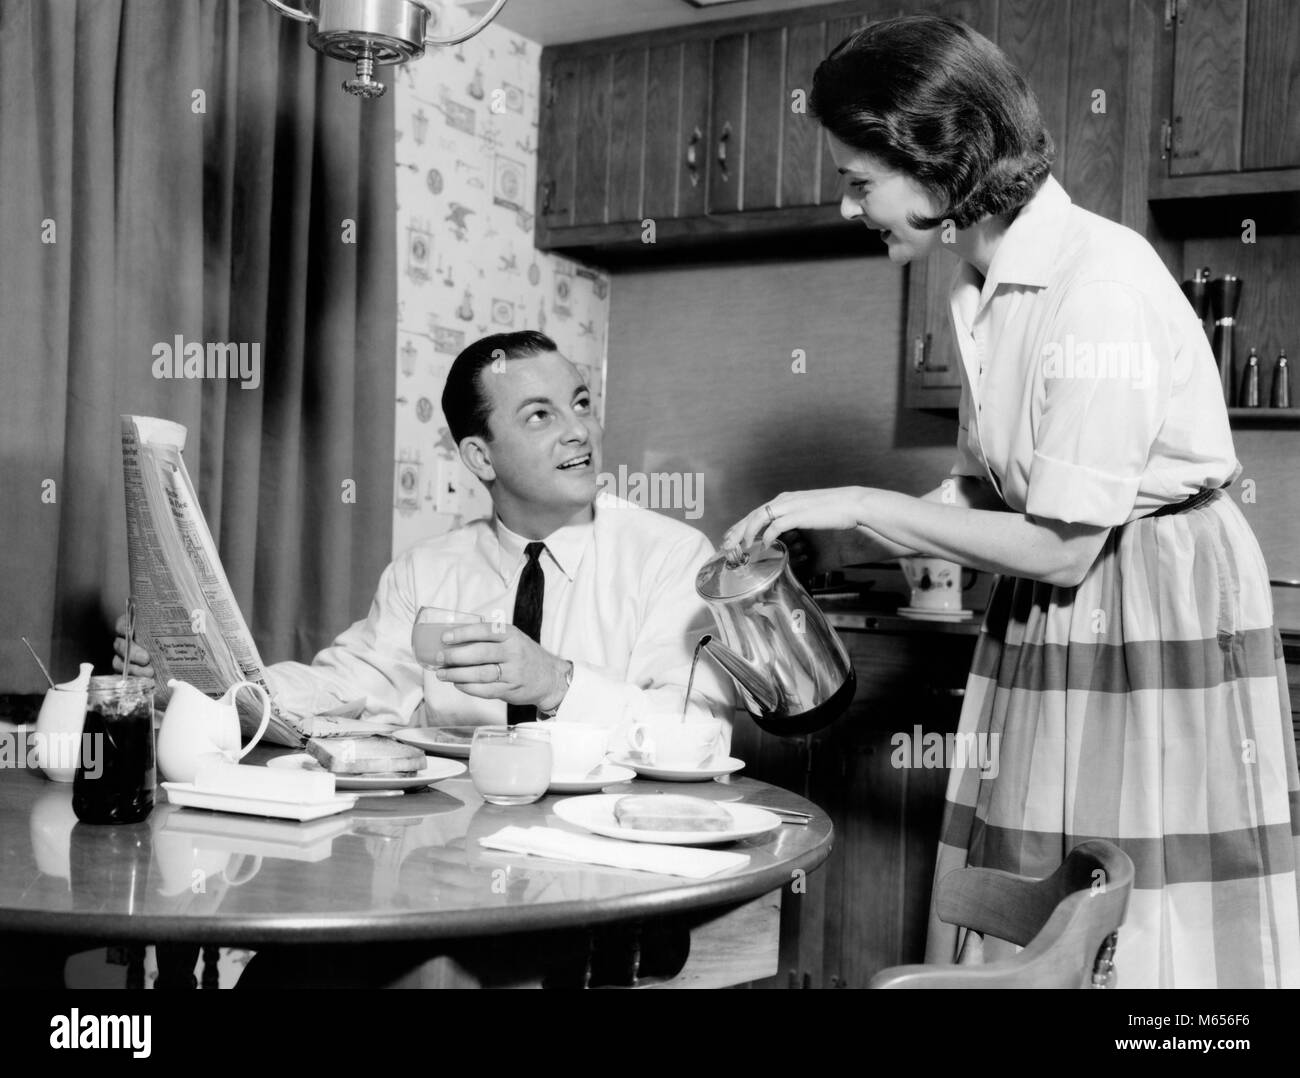 1960s WIFE POURING BREAKFAST COFFEE FOR HUSBAND DRINKING JUICE READING MORNING NEWSPAPER - d3400 HAR001 HARS SPOUSE HUSBANDS HEALTHINESS HOME LIFE COPY SPACE FRIENDSHIP HALF-LENGTH LADIES CARING COUPLES INDOORS NOSTALGIA MORNING TOGETHERNESS 30-35 YEARS 35-40 YEARS HOMEMAKER WIVES HAPPINESS HOMEMAKERS CHEERFUL HOUSEWIVES SMILES CONNECTION JOYFUL MALES MID-ADULT MID-ADULT MAN MID-ADULT WOMAN READS B&W BLACK AND WHITE CAUCASIAN ETHNICITY JUICE OLD FASHIONED PERCOLATOR PERSONS POURS WOMEN TABLE Stock Photo